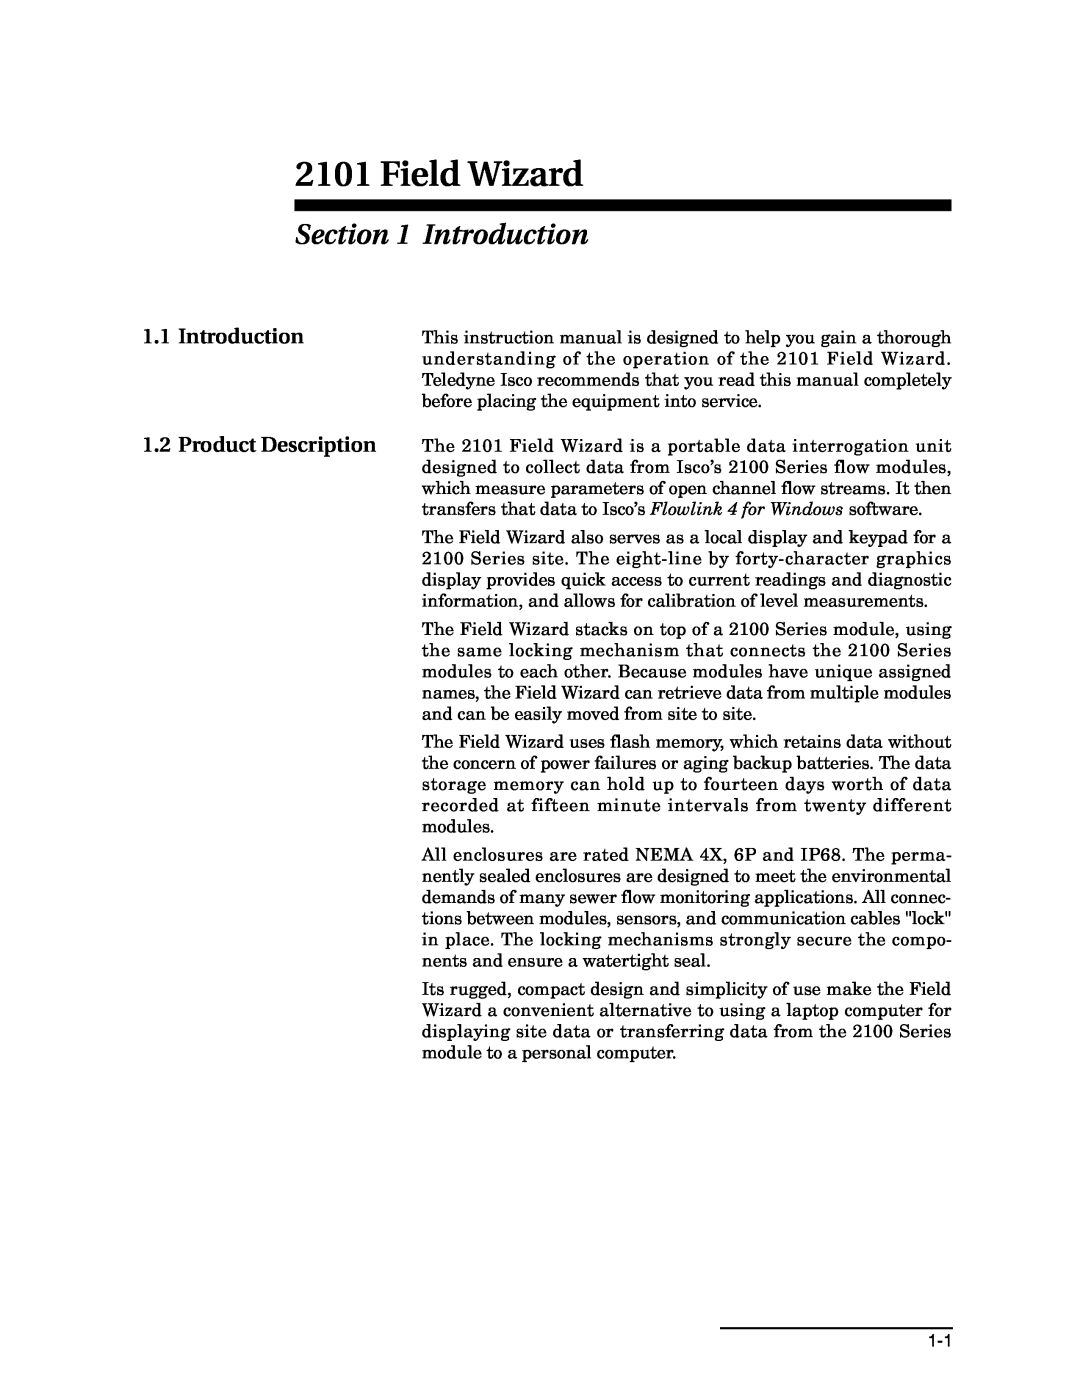 Teledyne 2101 installation and operation guide Introduction 1.2 Product Description, Field Wizard 